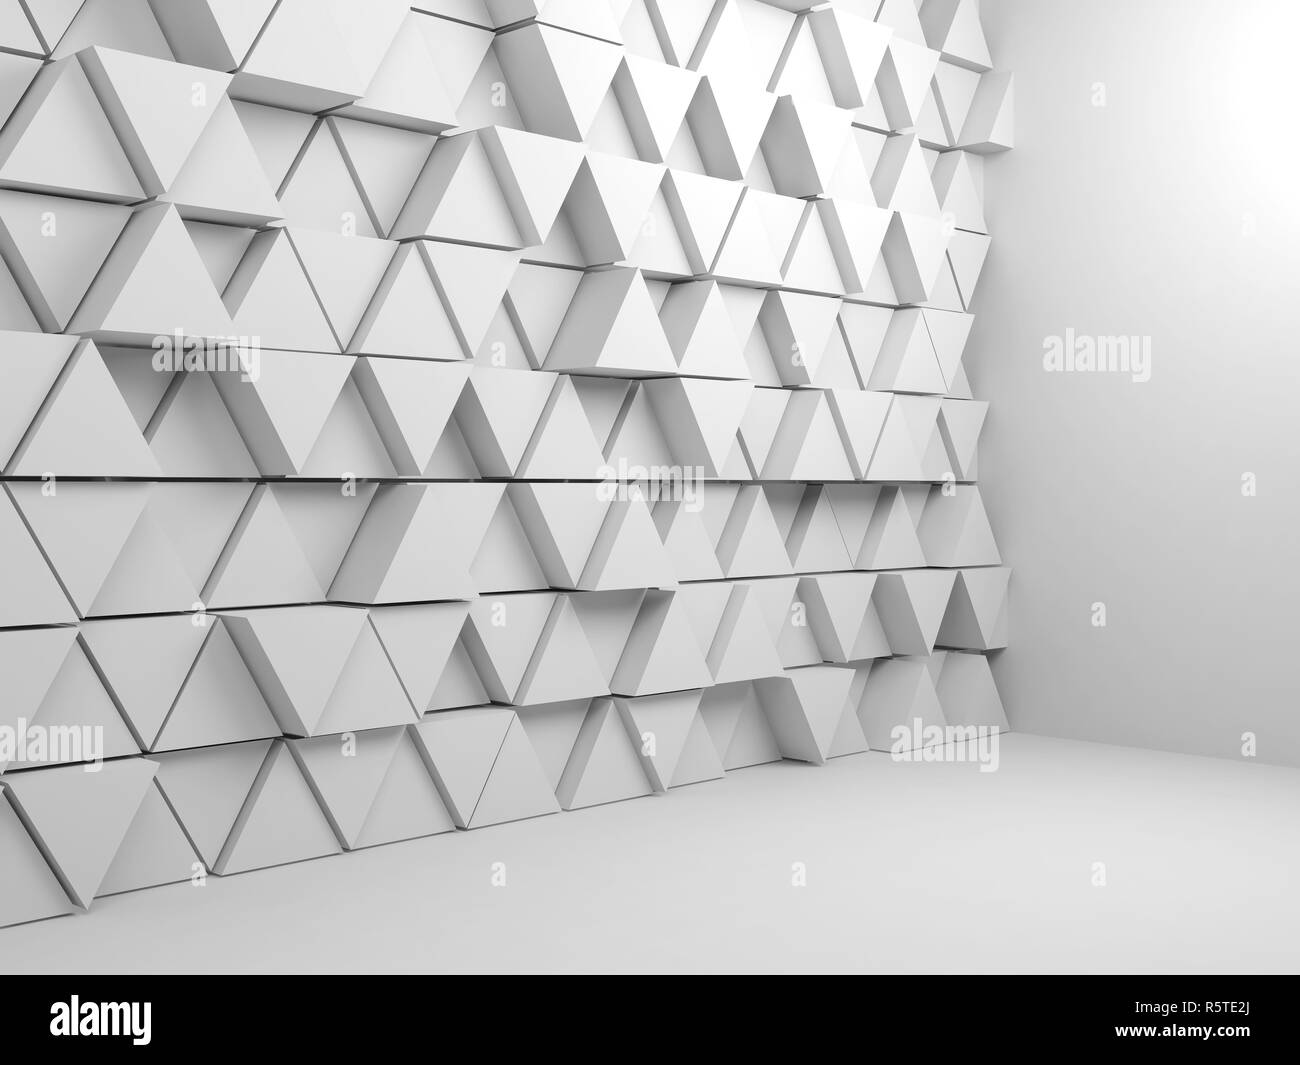 A 3D render of a hdhdhd on a white background Stock Photo - Alamy